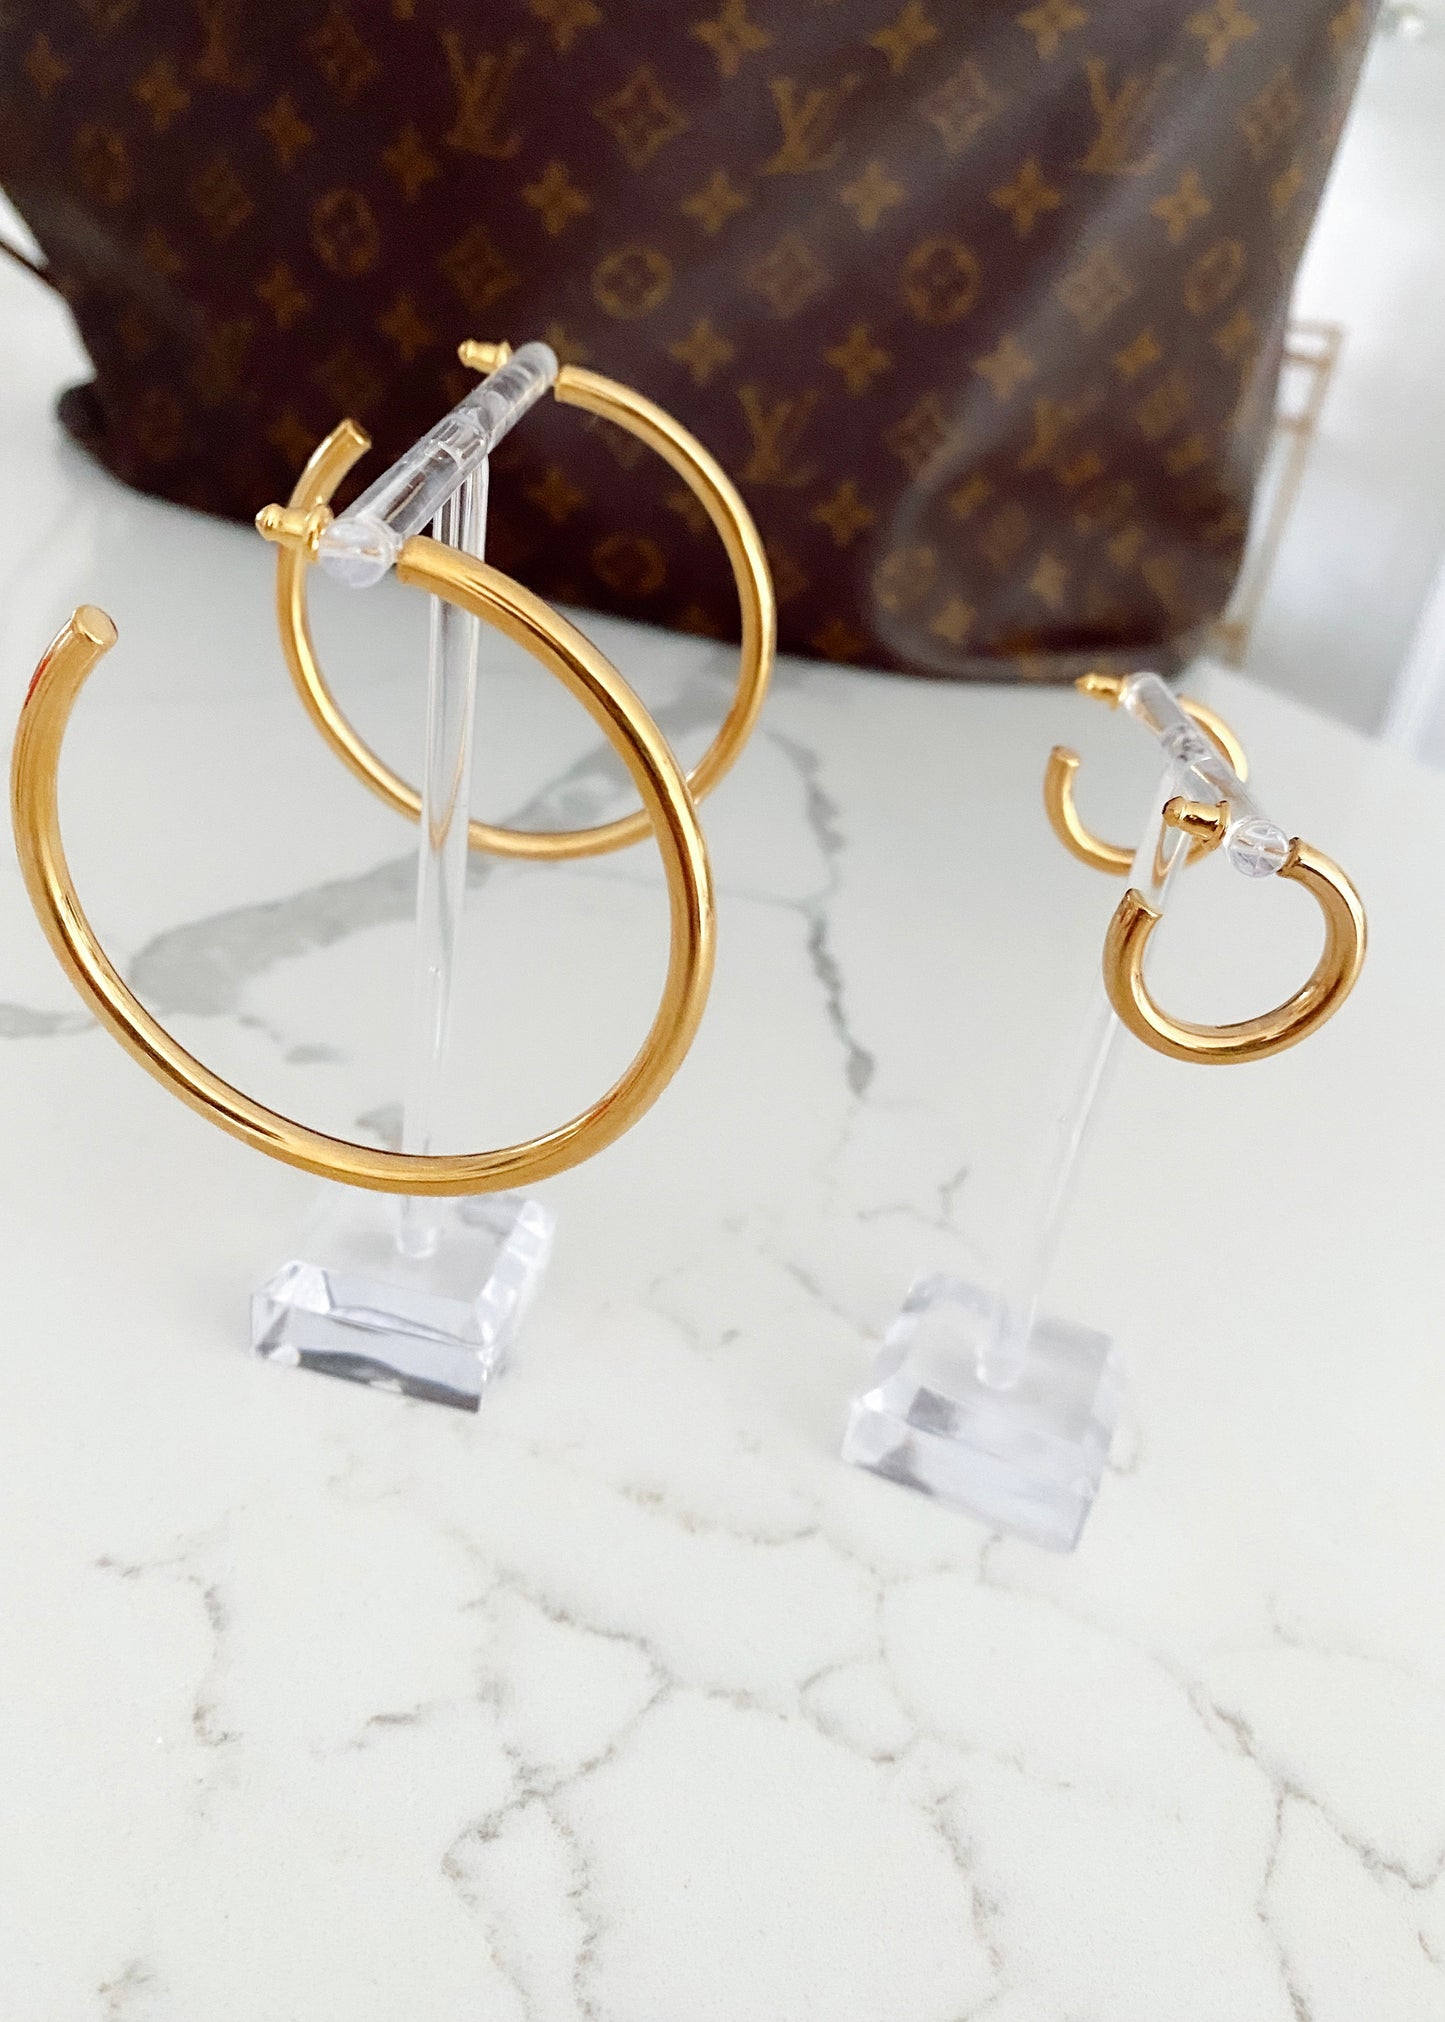 SMALL GOLD HOOPS